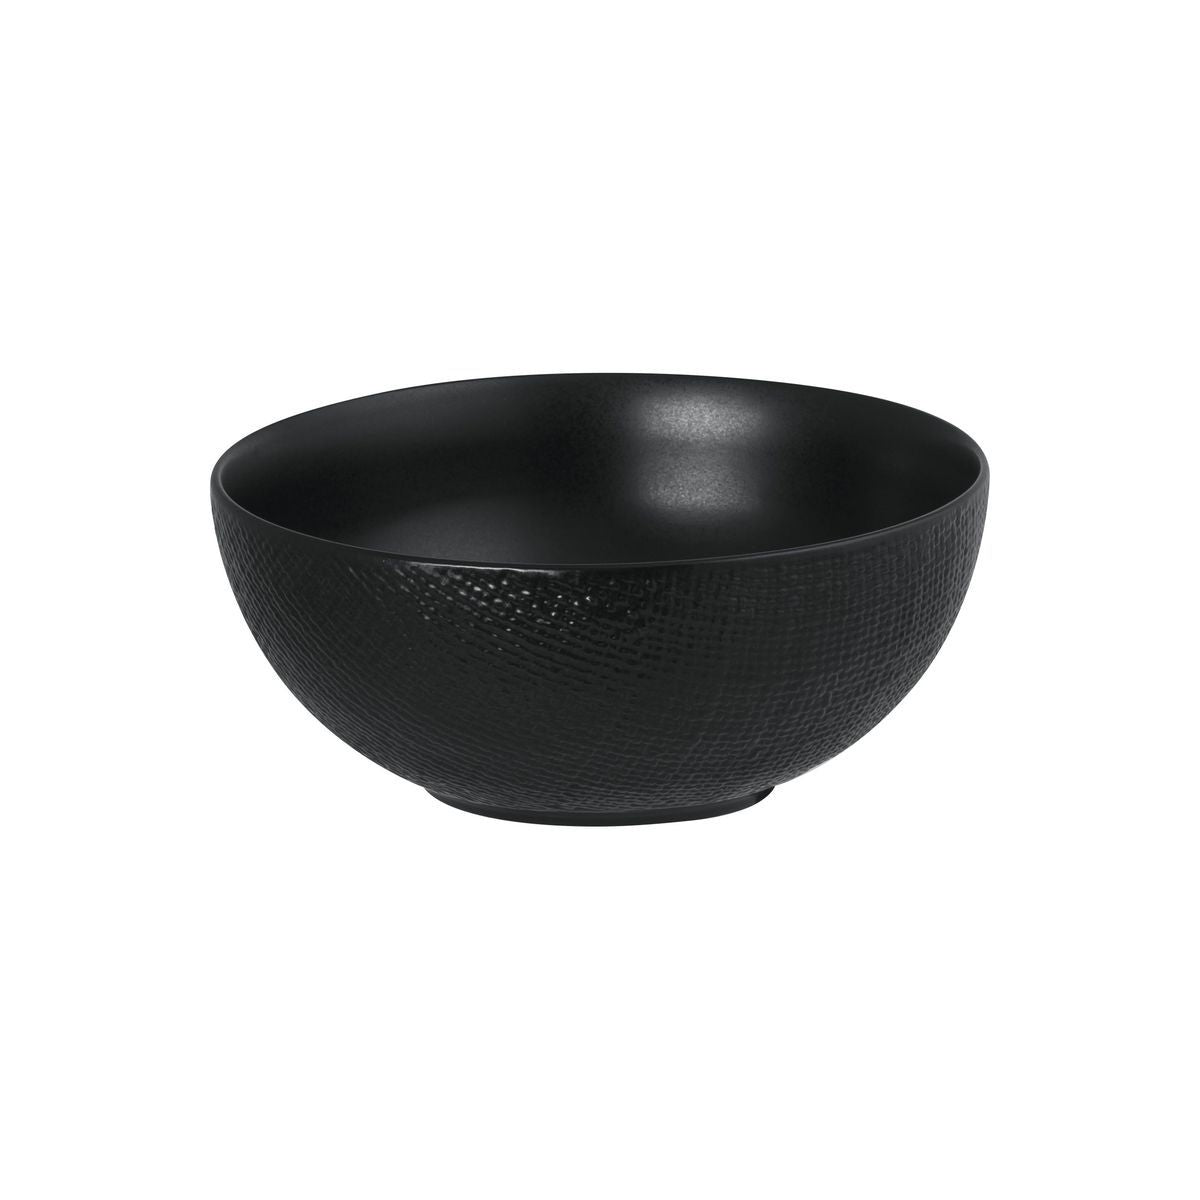 ROUND BOWL-190mm , MATT BLACK from Luzerne. Textured, made out of Ceramic and sold in boxes of 4. Hospitality quality at wholesale price with The Flying Fork! 